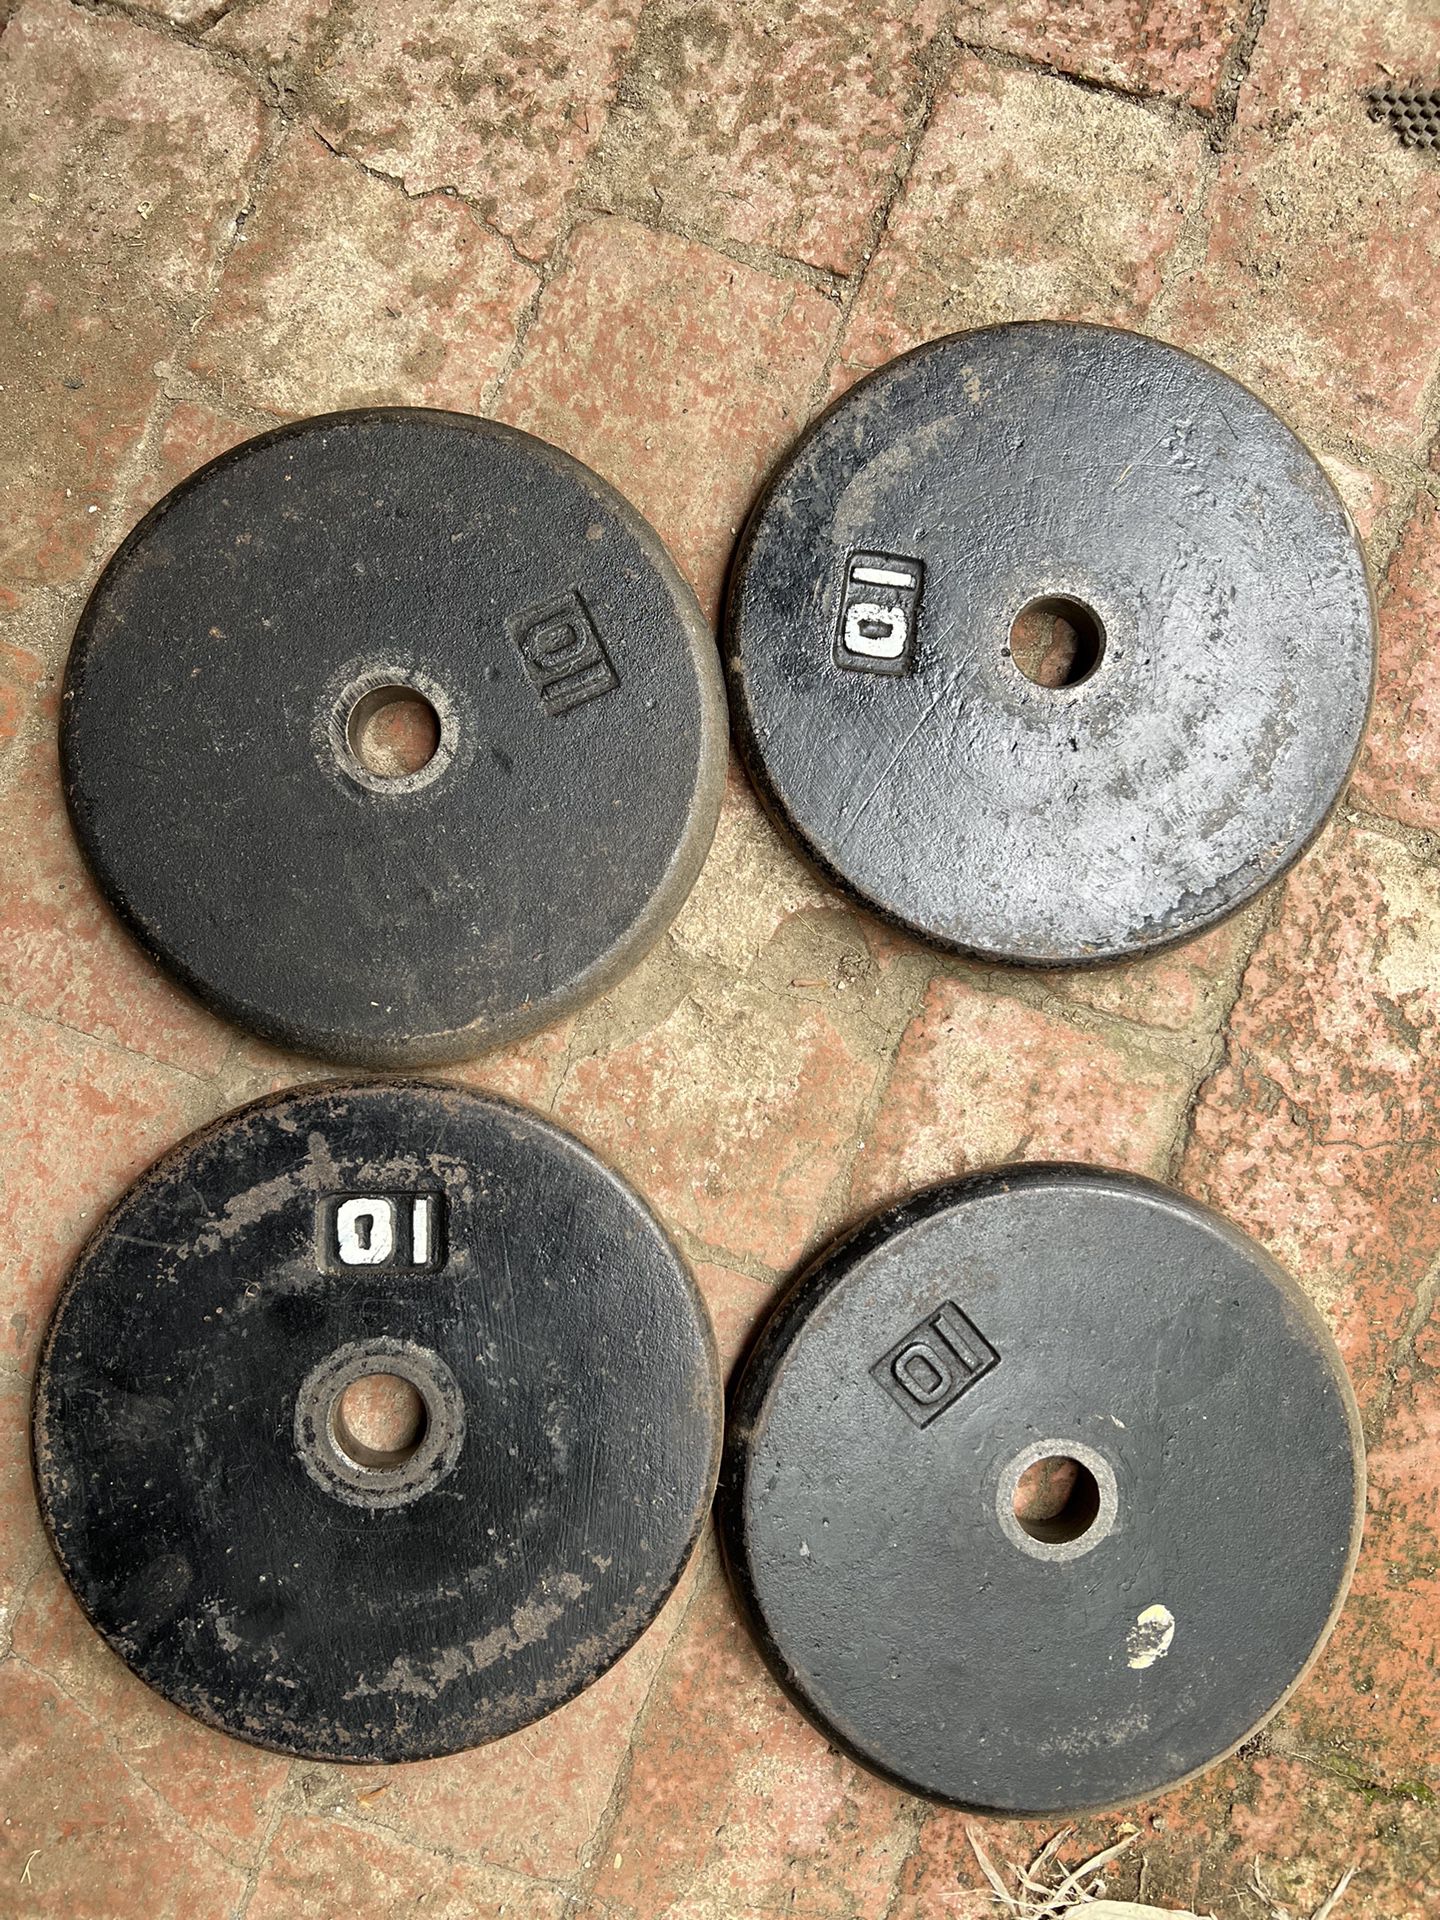 Dumbbell Weights  1 Inch Hole 10 Pound Plates 